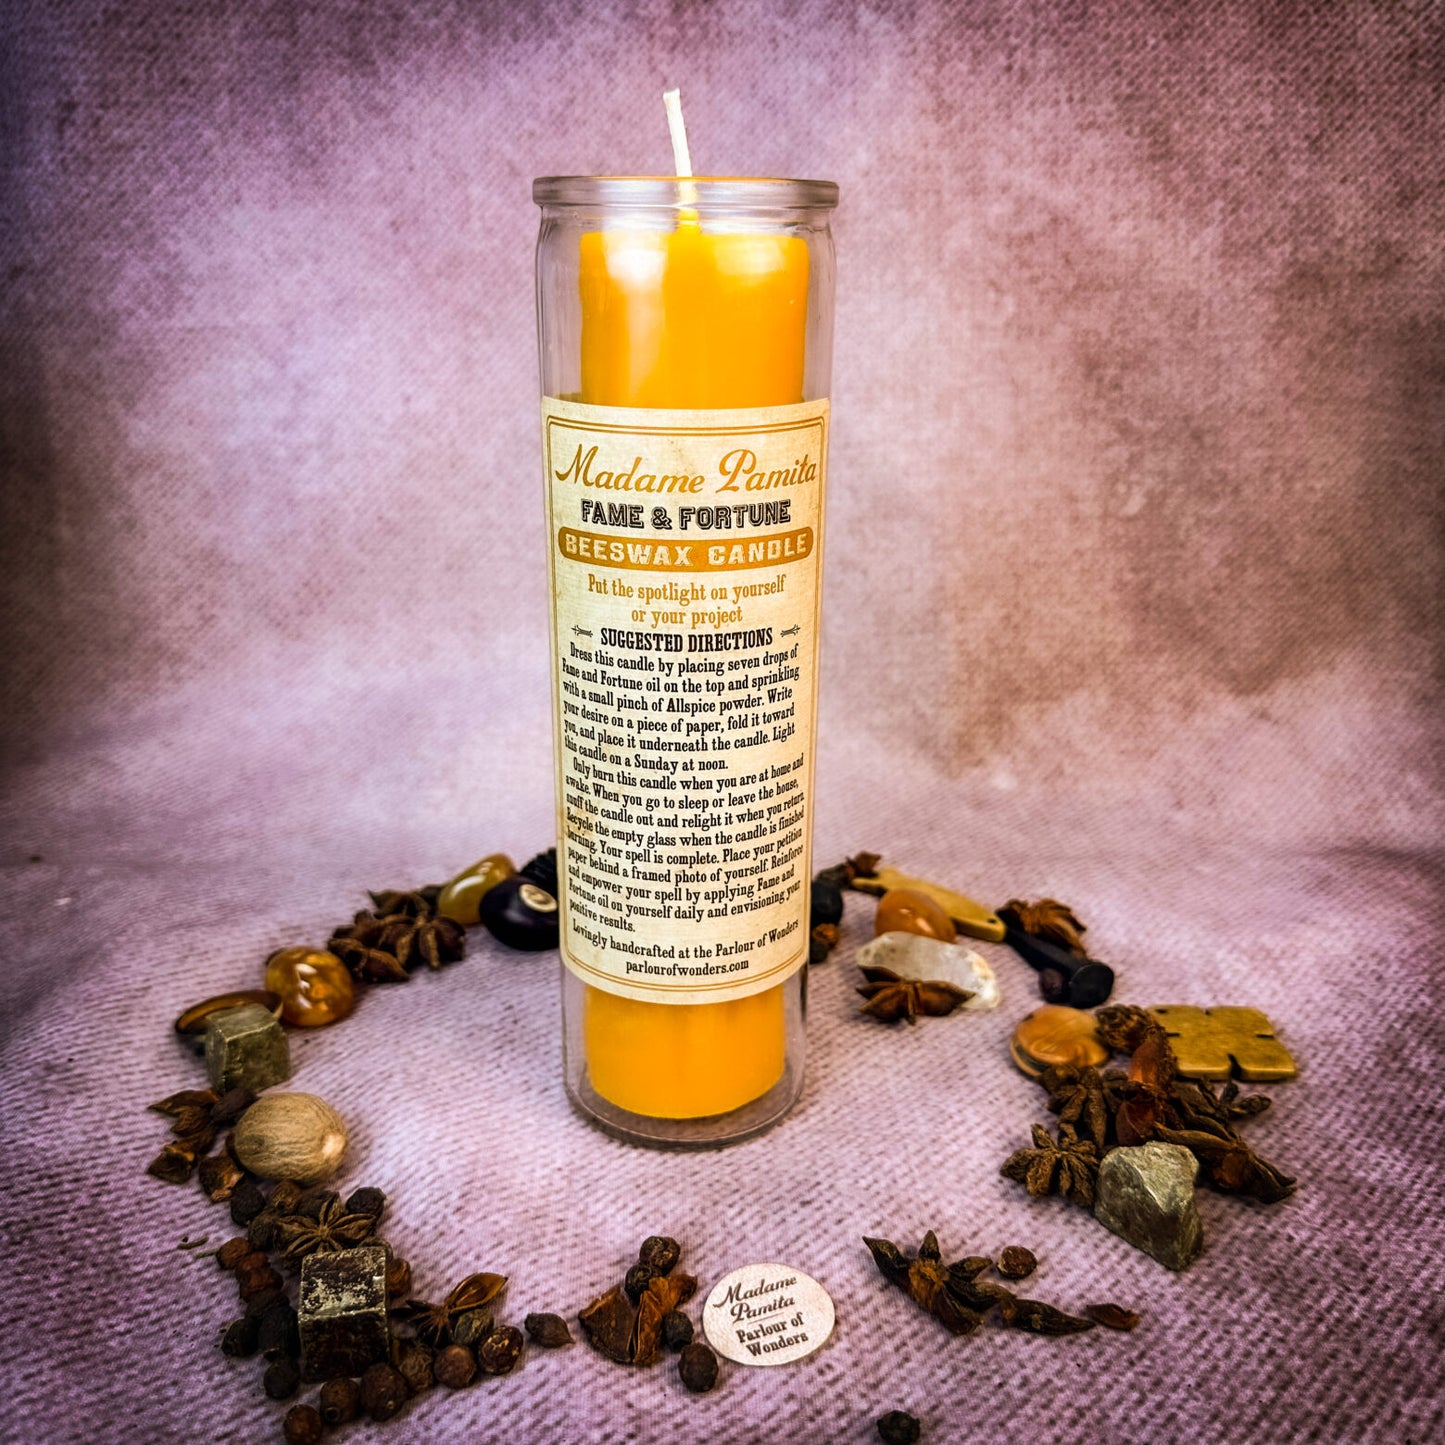 Madame Pamita Fame and Fortune Beeswax Vigil Candle